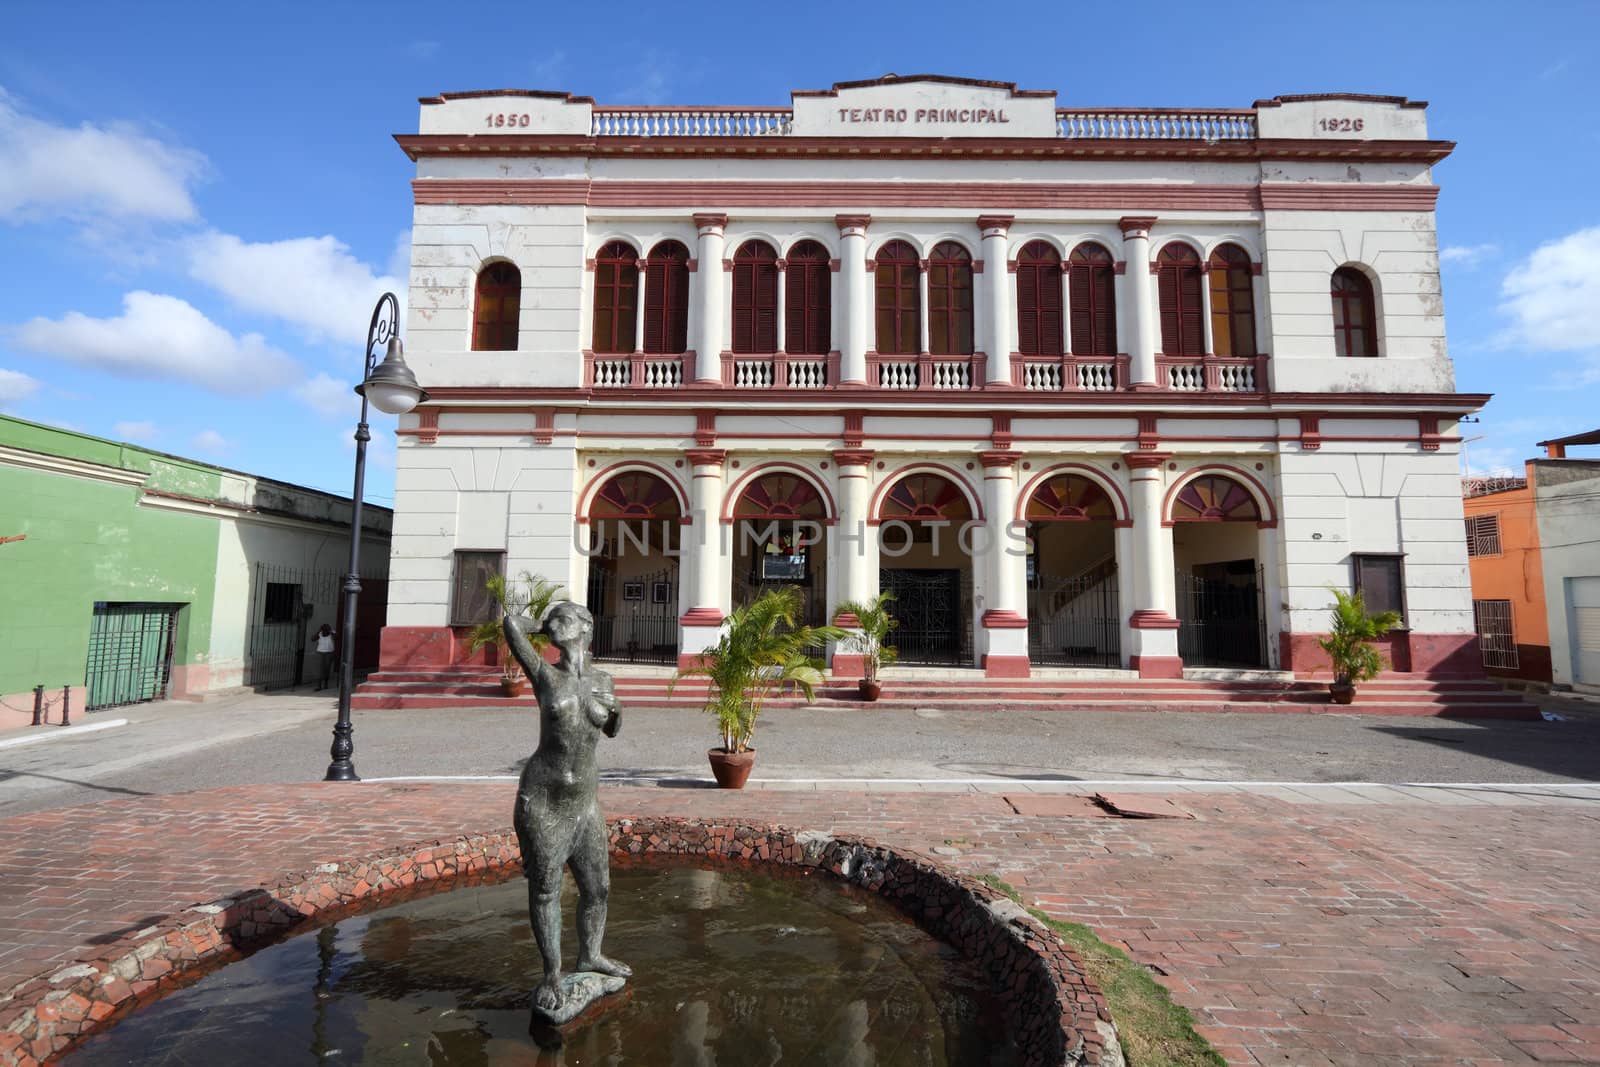 Camaguey, Cuba - old town listed on UNESCO World Heritage List. Teatro Principal - the theatre.